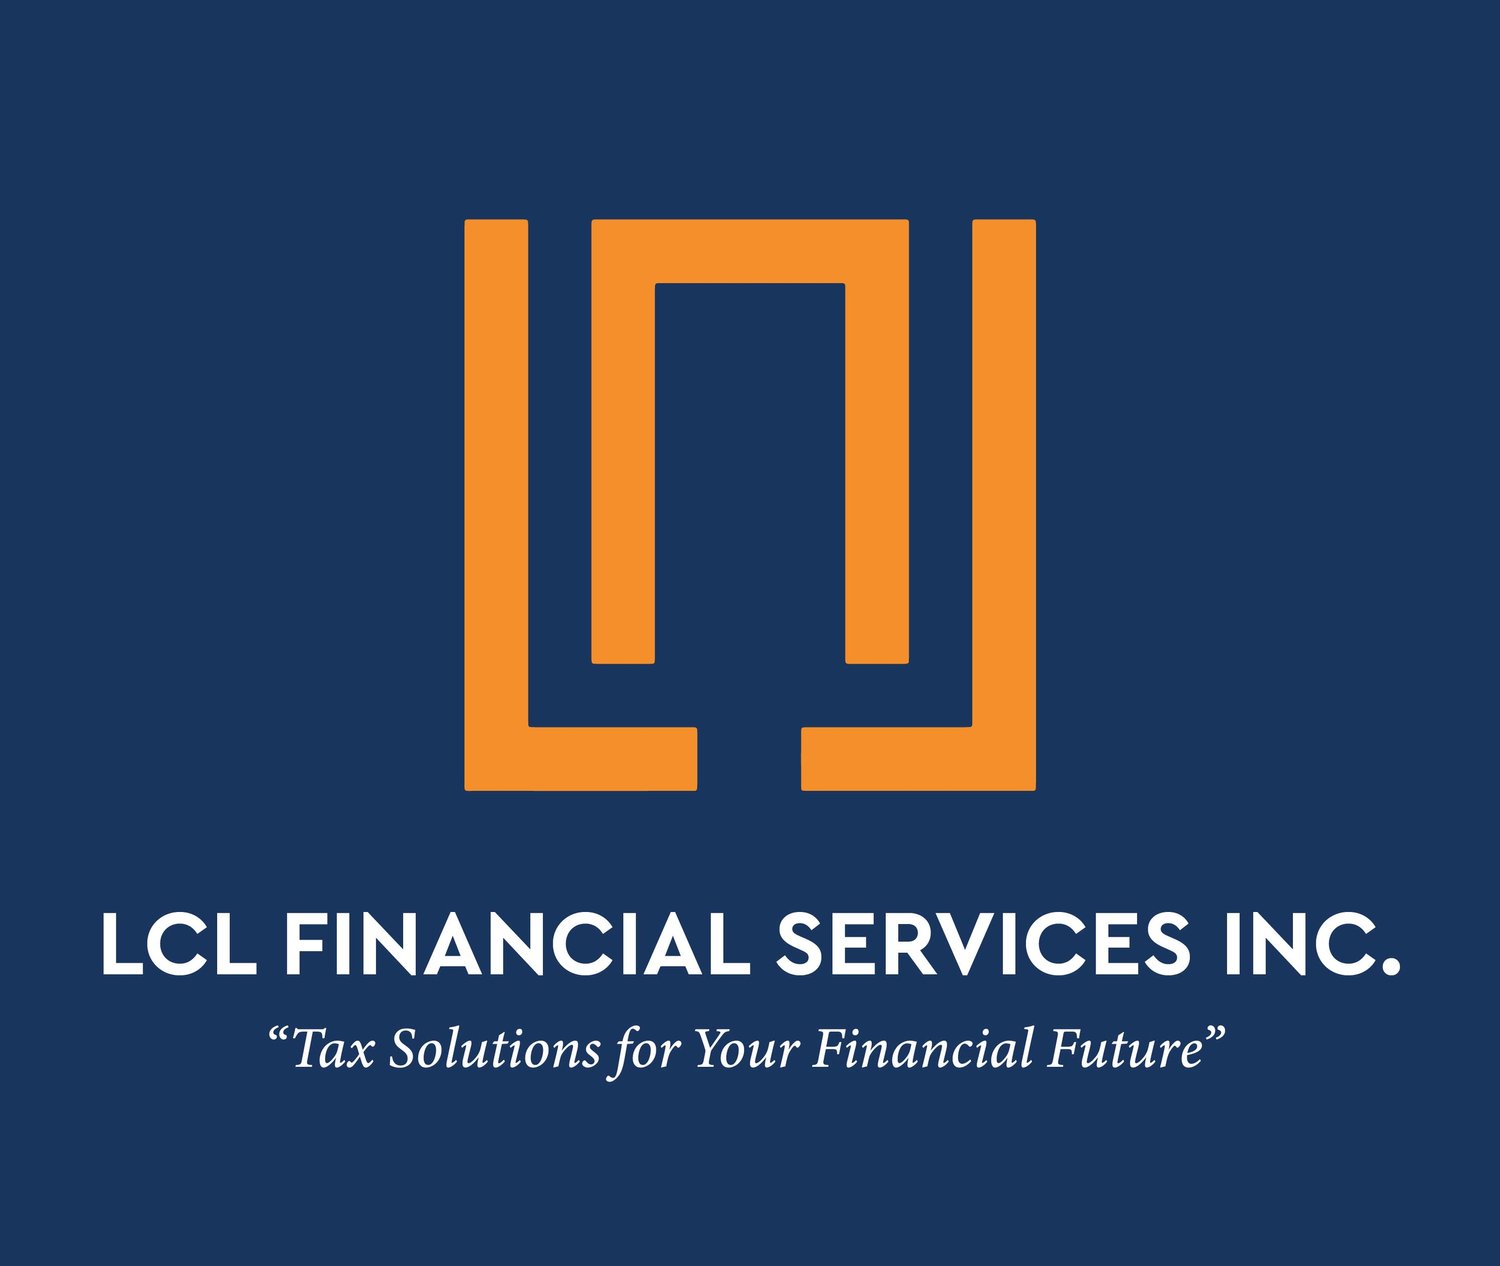 LCL Financial Services